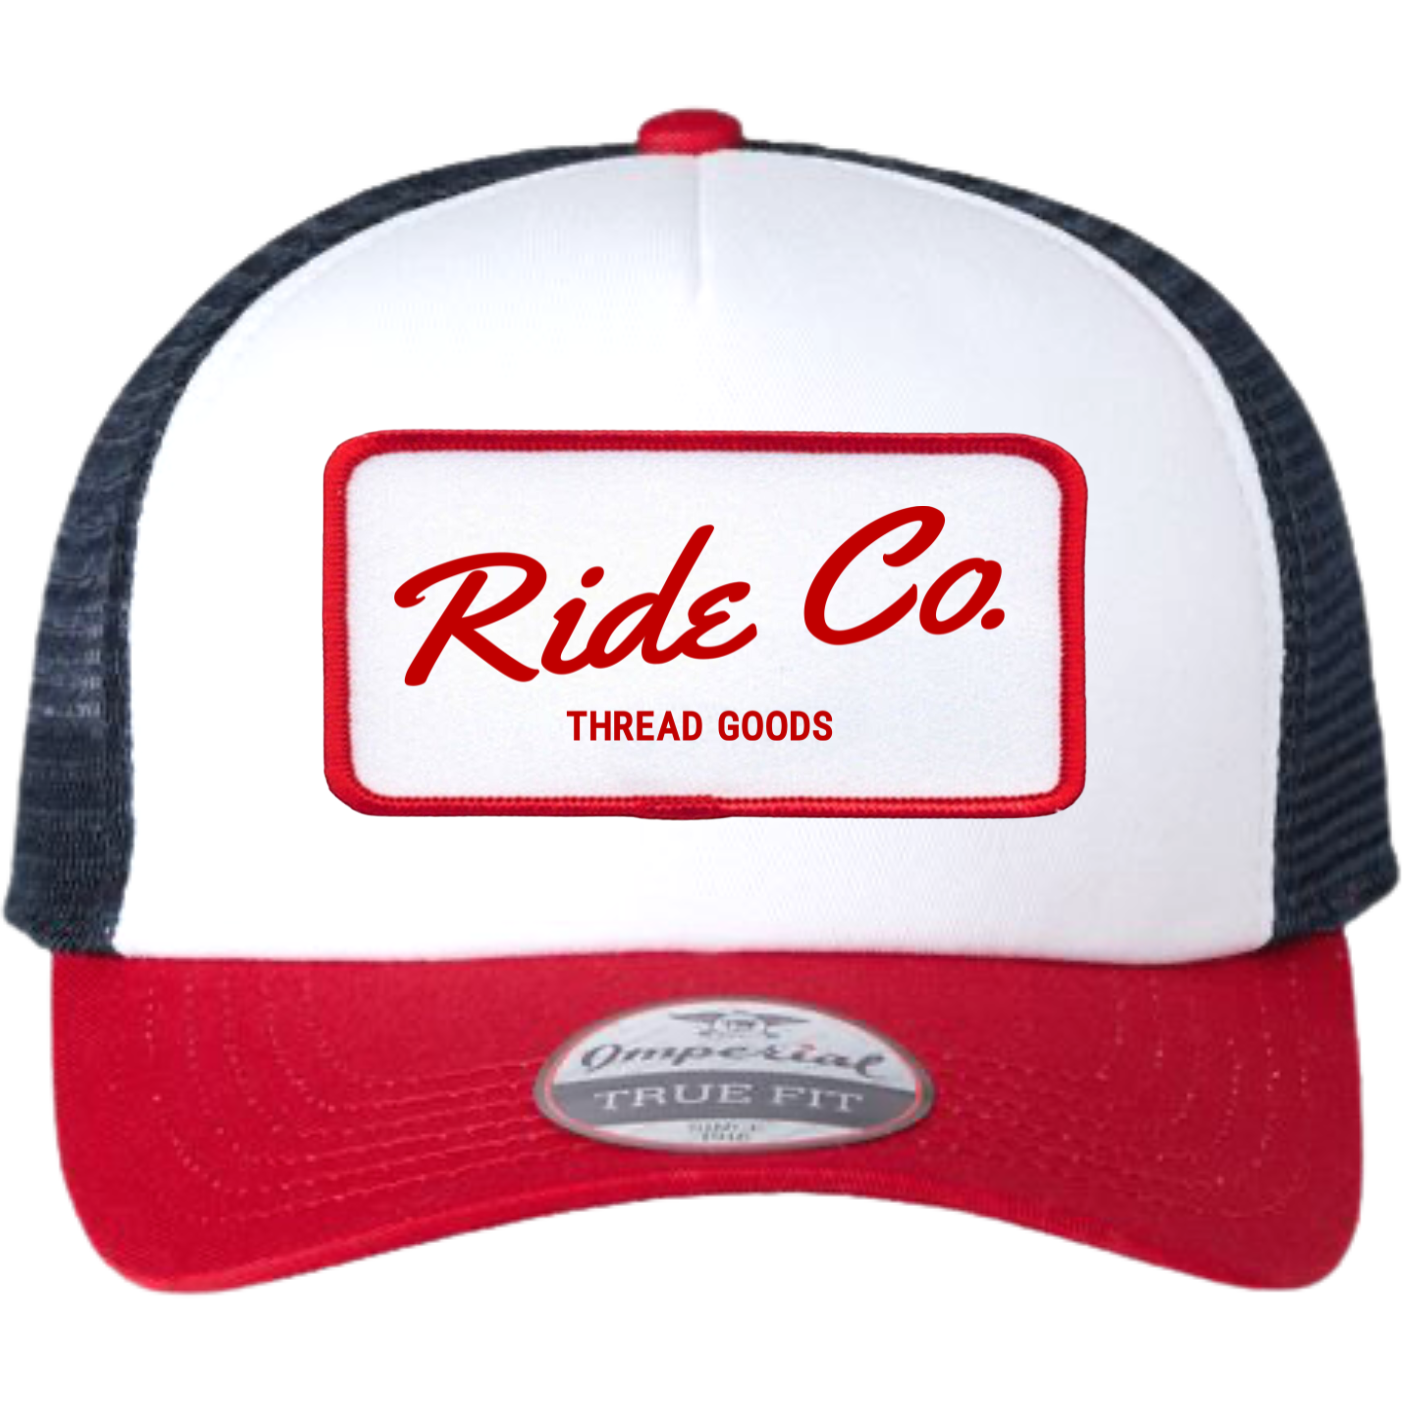 Ride Co. Vintage Red, White and Navy Snapback